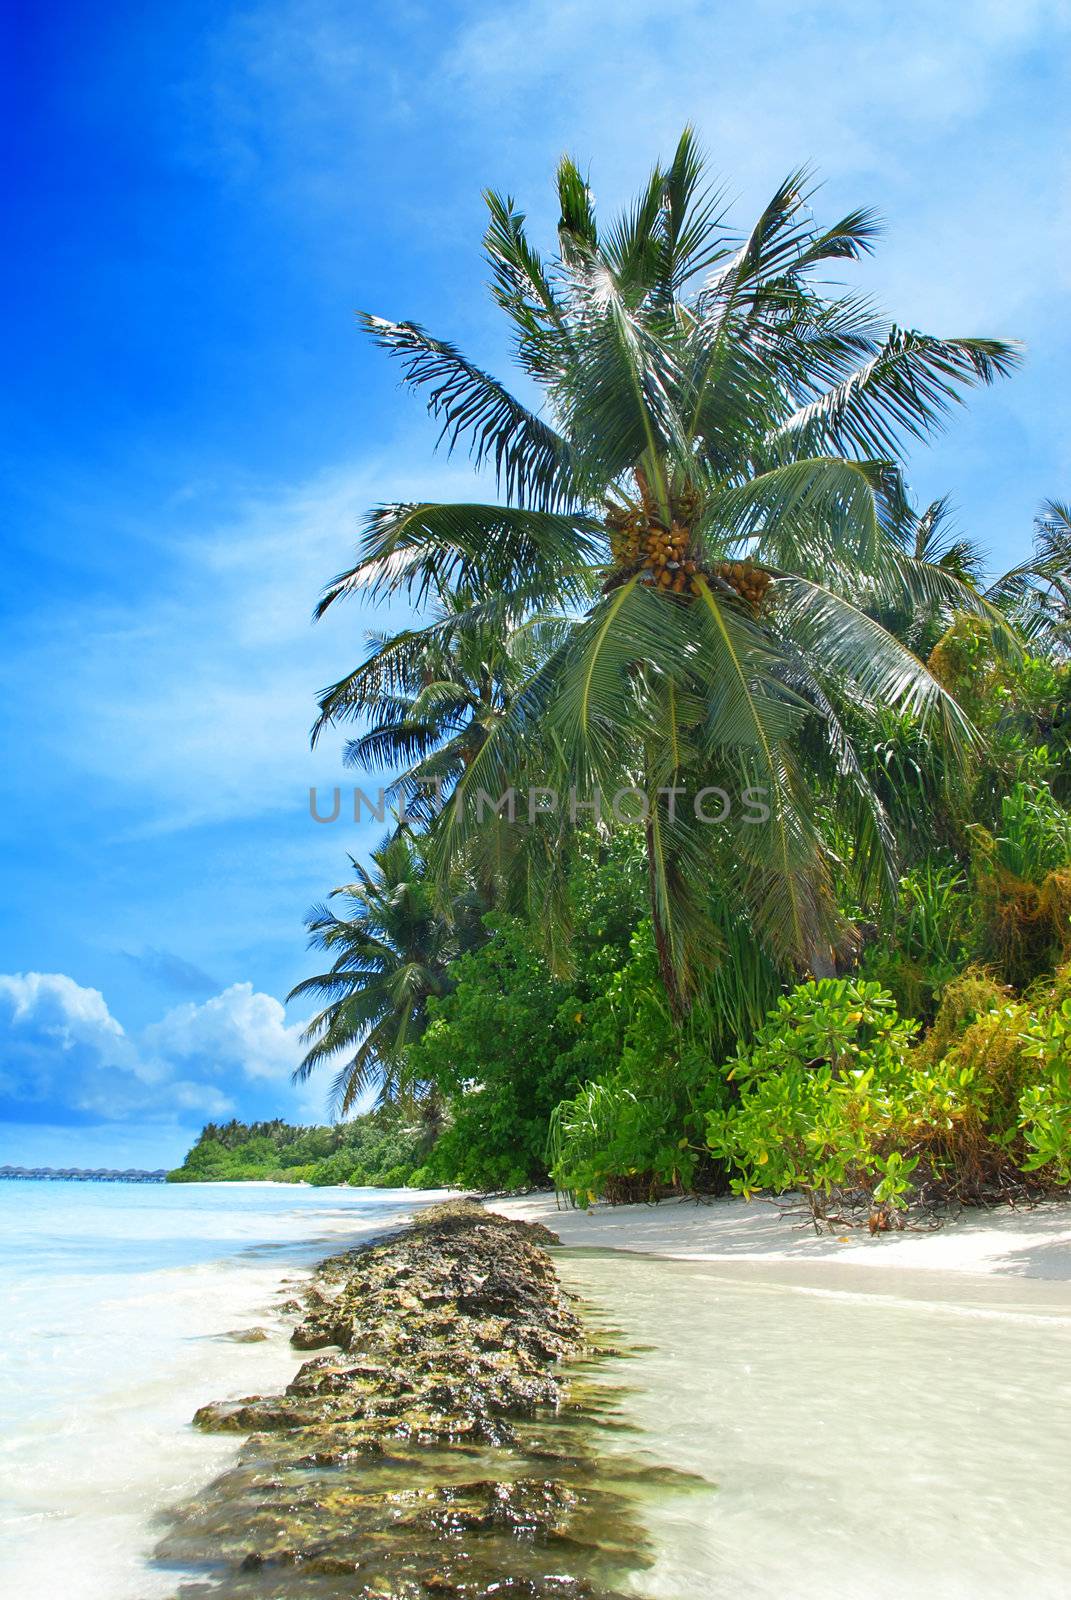 Beutiful tropical beach in the Maldives with a coconut palms hanging over the sea and stone formation in the front